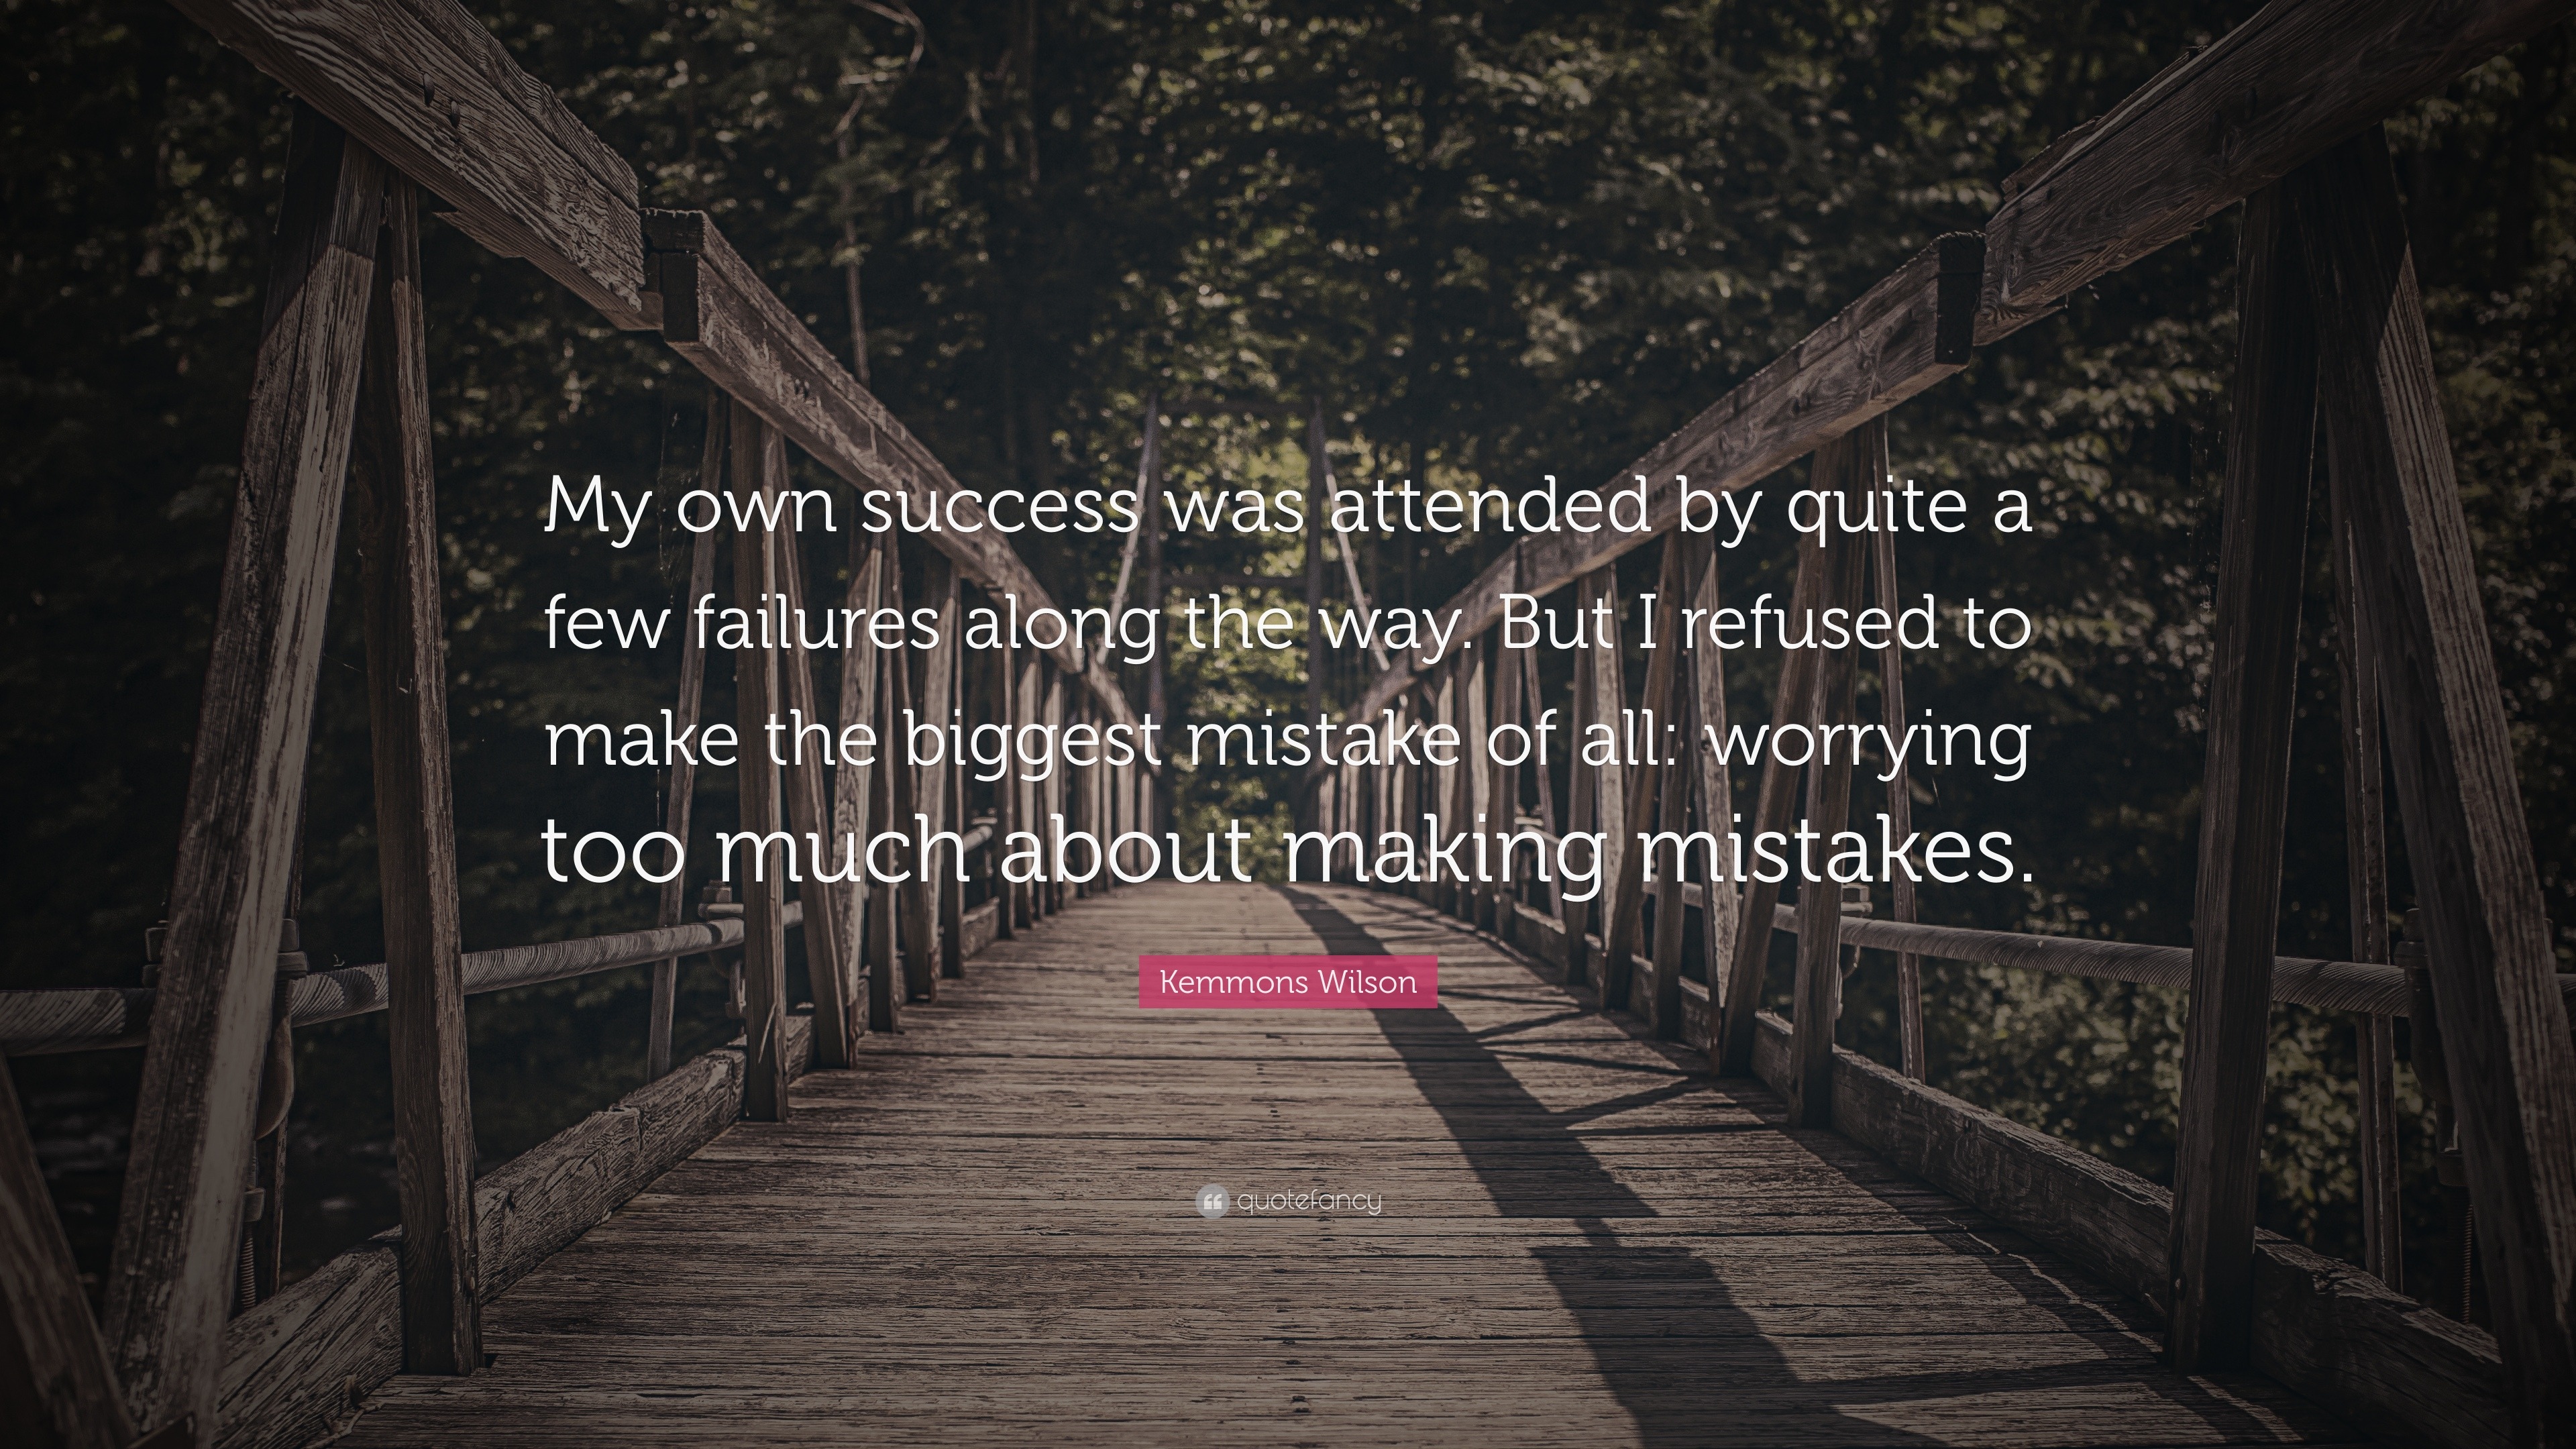 Kemmons Wilson Quote: “My own success was attended by quite a few